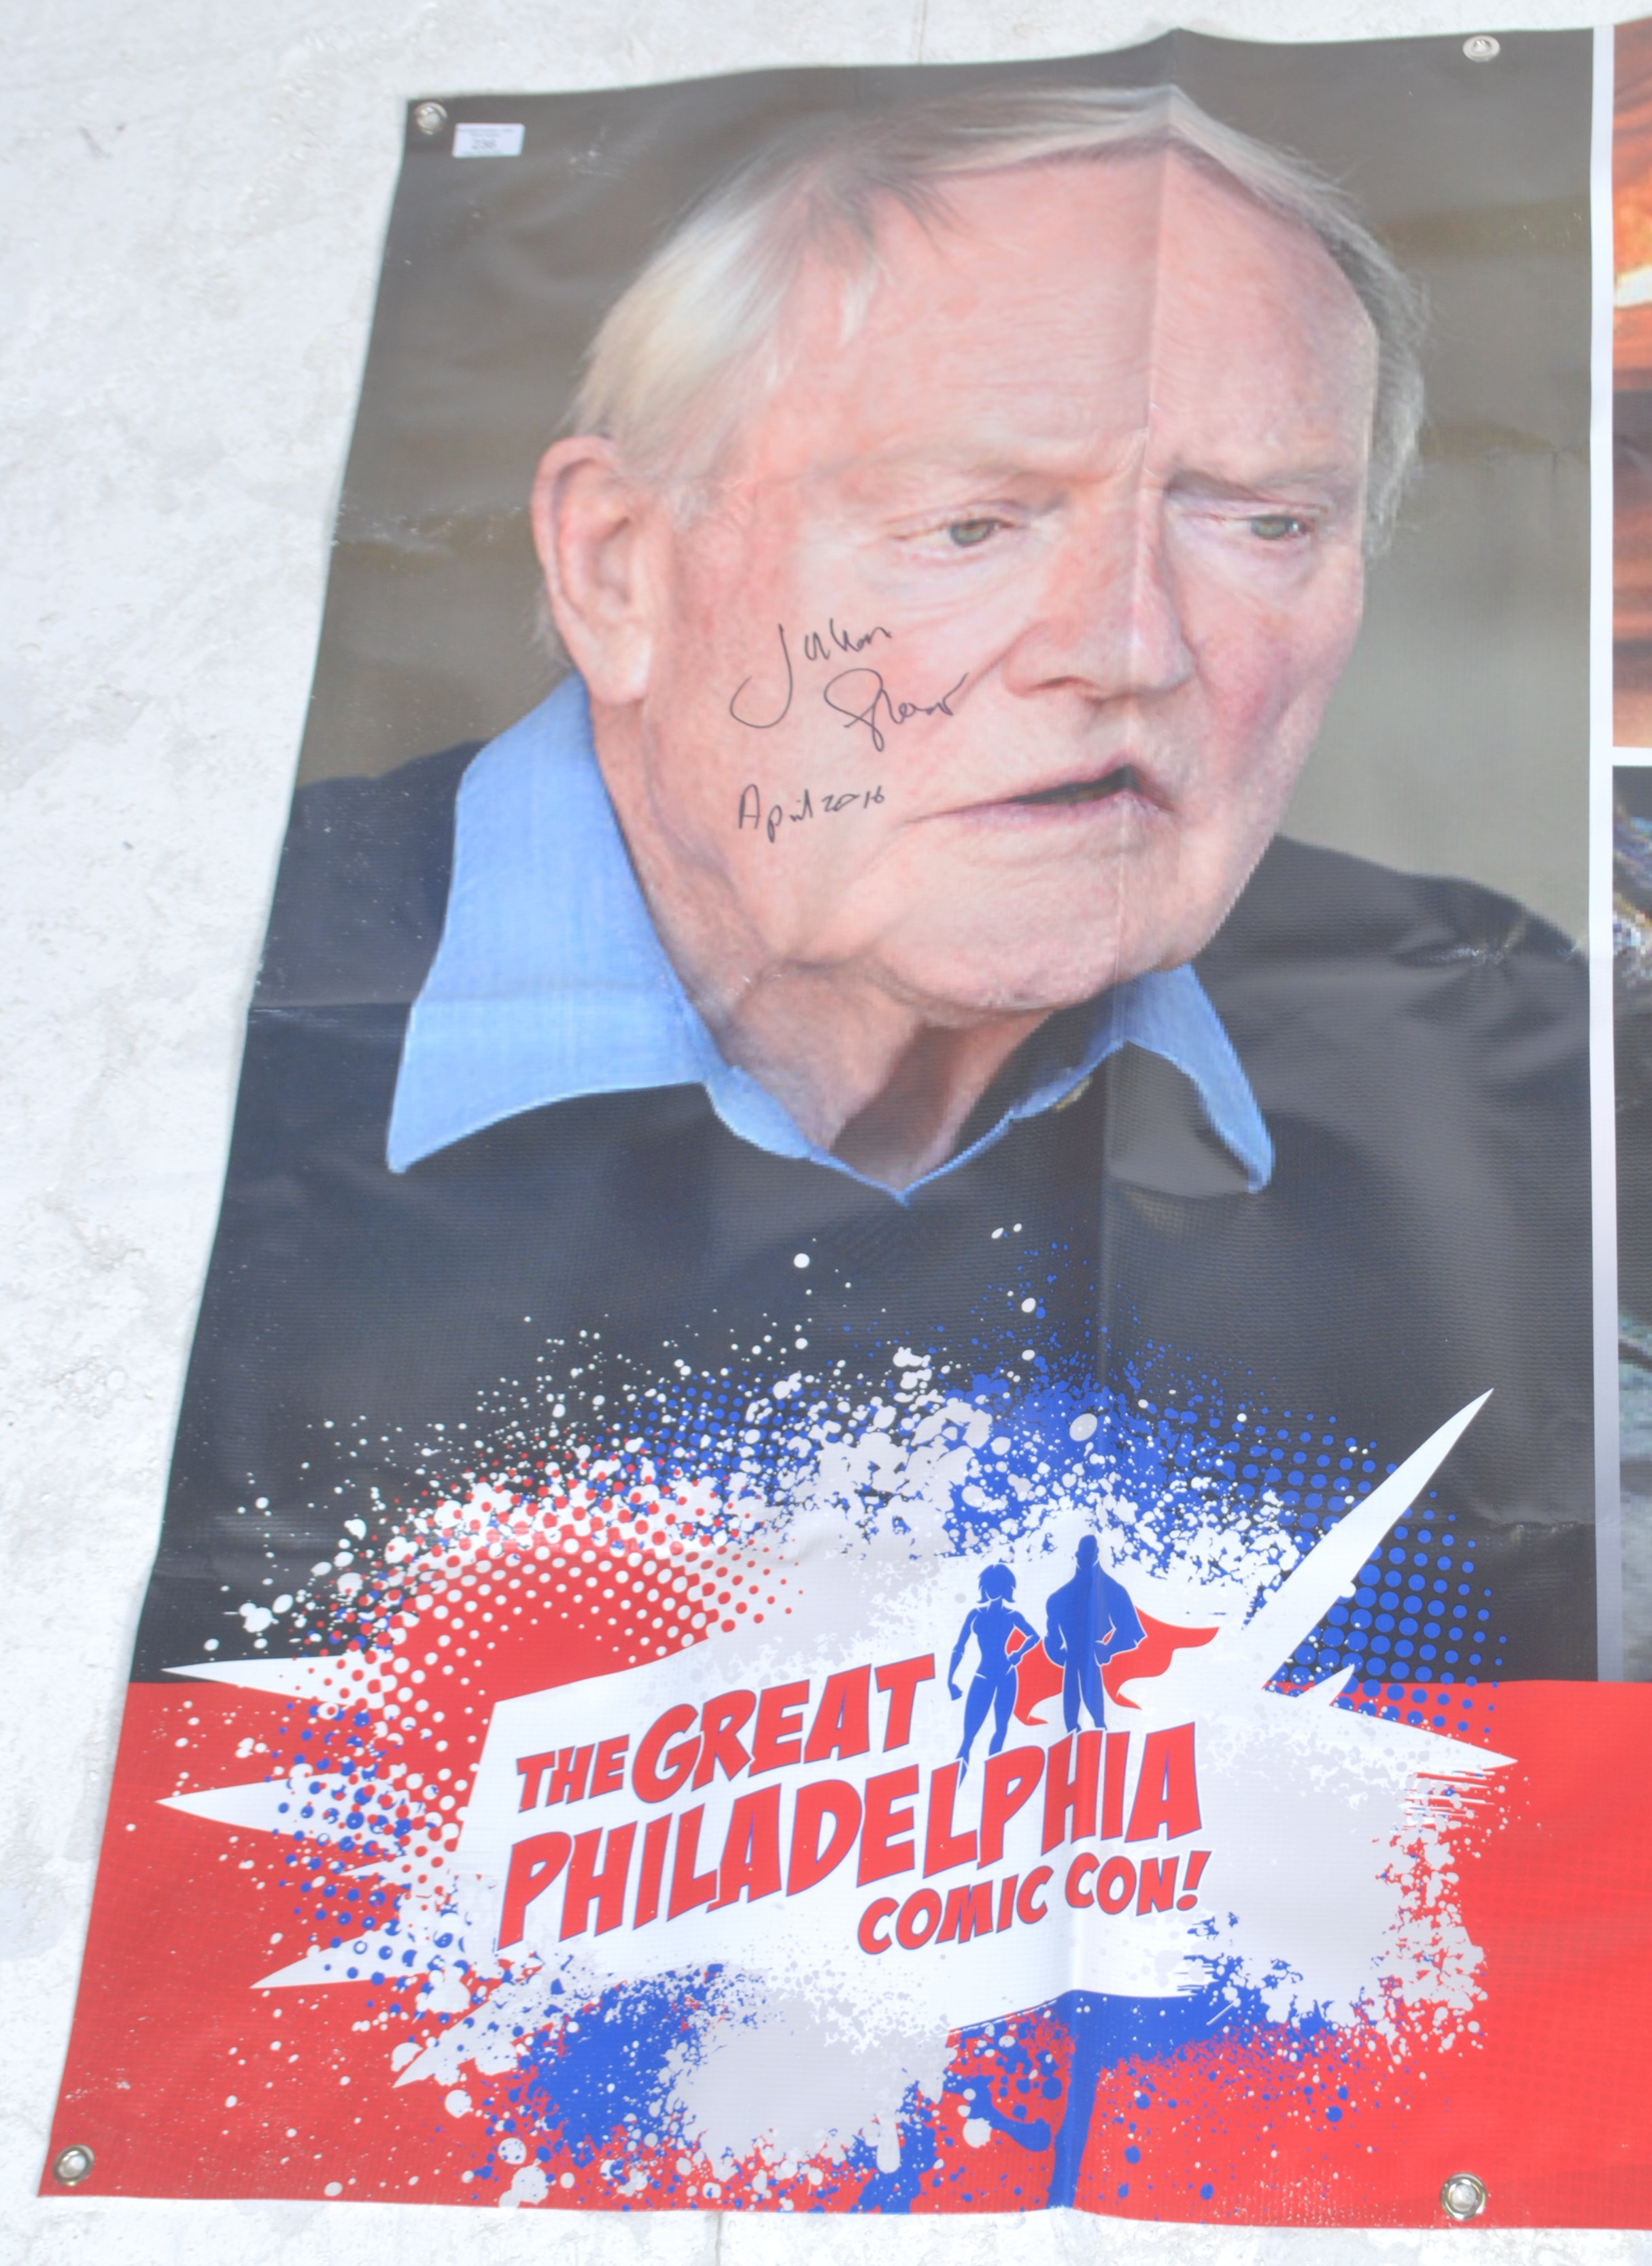 JULIAN GLOVER'S ORIGINAL AUTOGRAPHED CONVENTION BANNER - Image 2 of 7